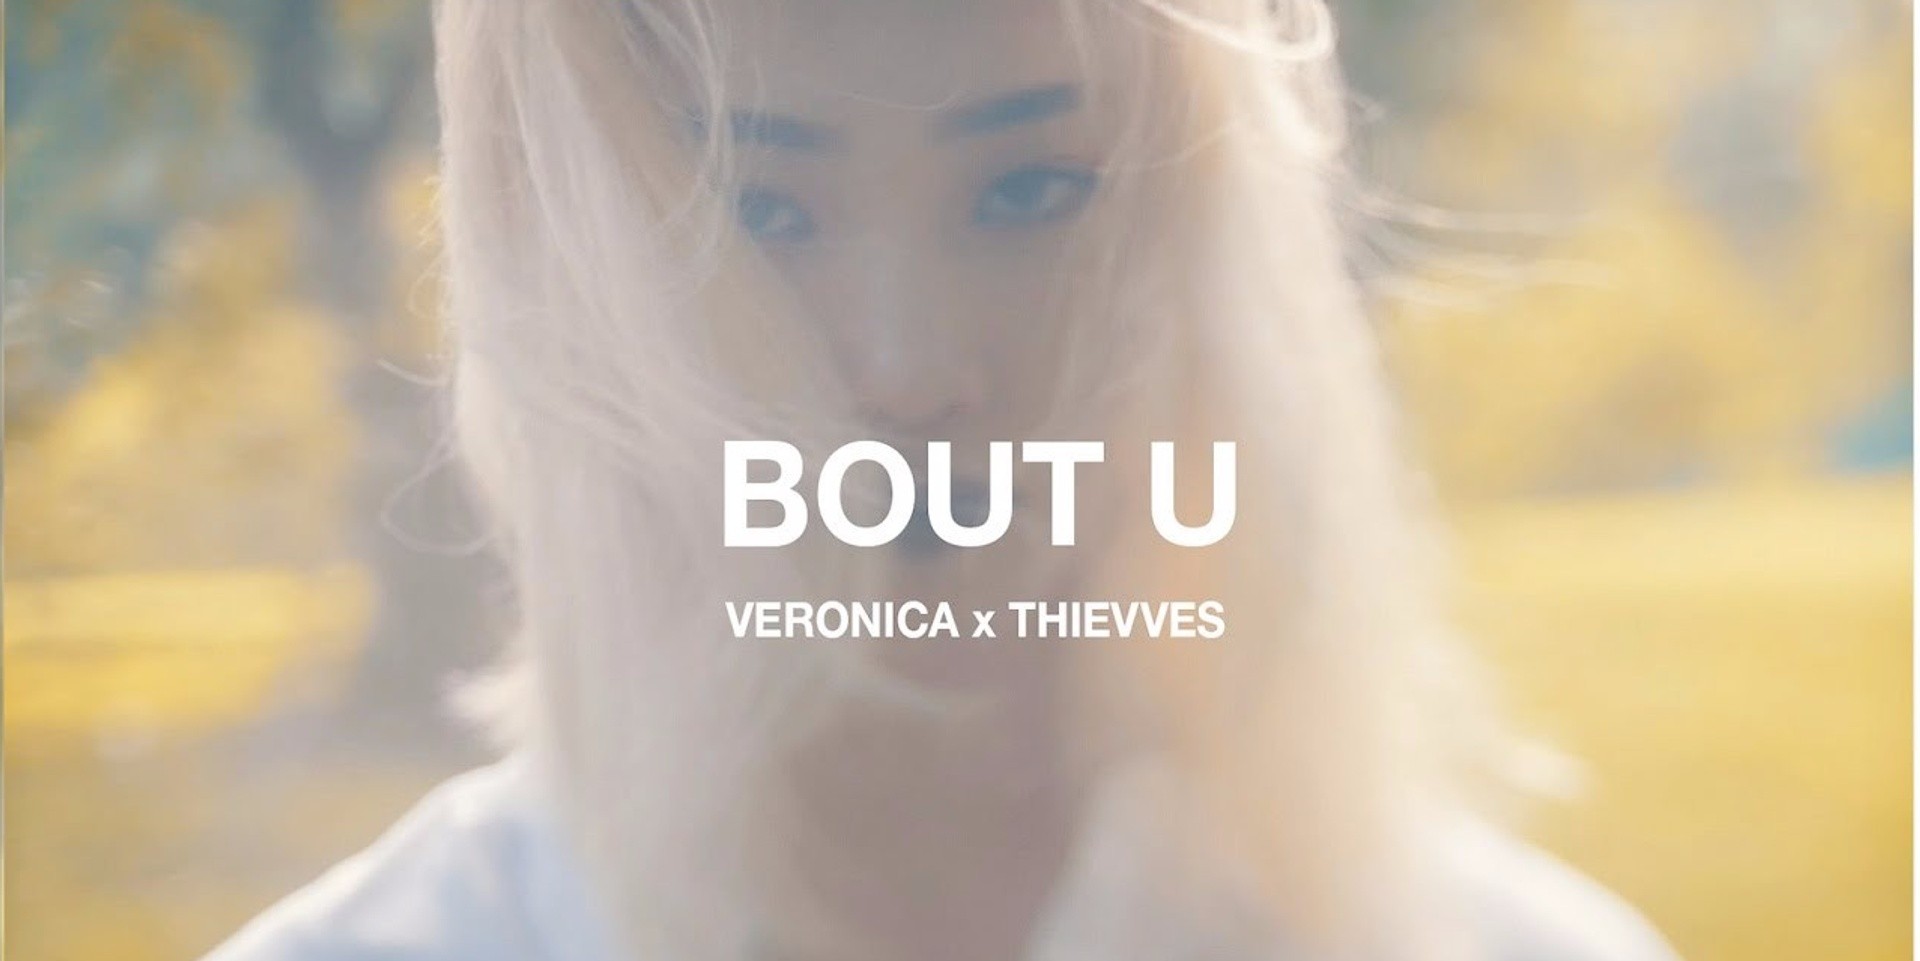 WATCH: Disco Hue's Veronica & THIEVVES premiere R&B side-project with lush single 'Bout U'